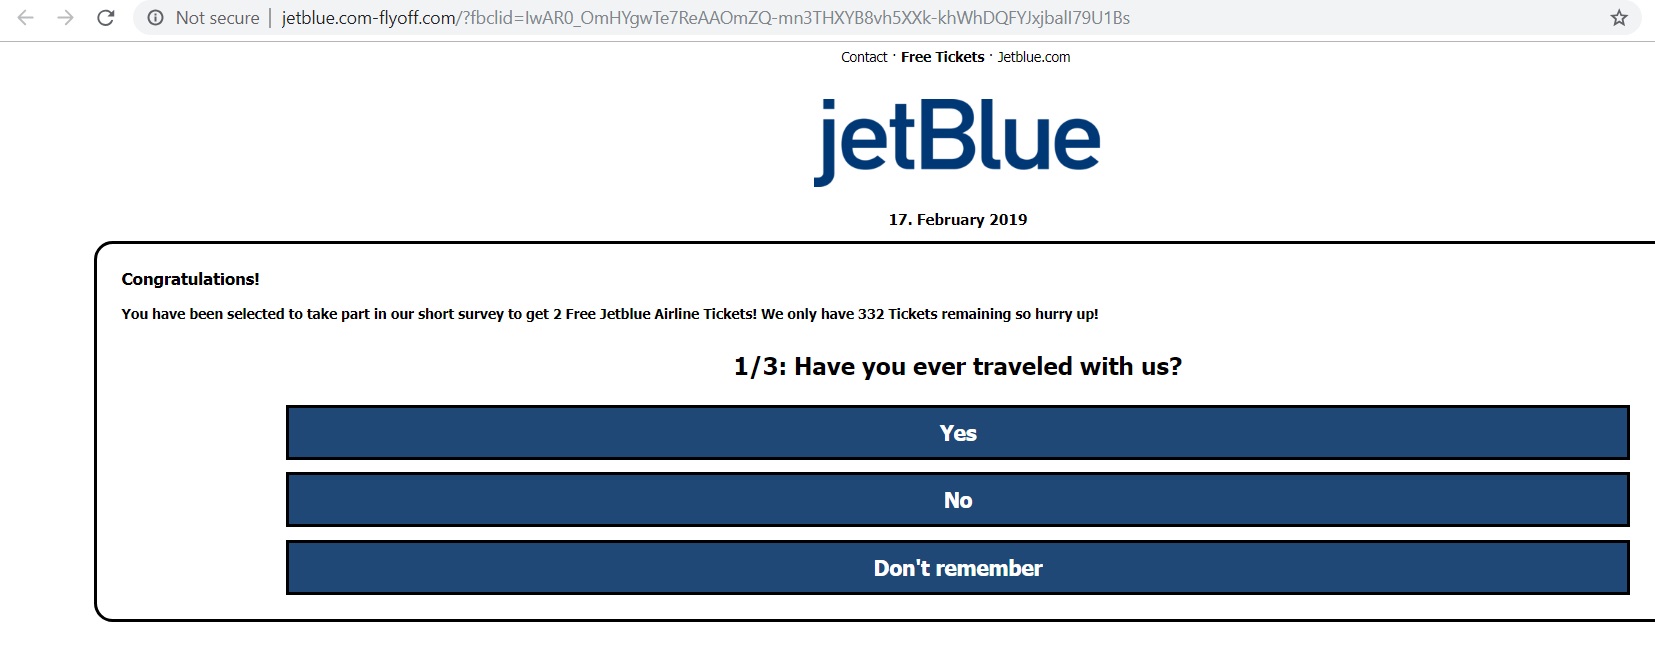 Jetblue Airways Gifting 2 FREE Tickets All to Celebrate their 19th Birthday